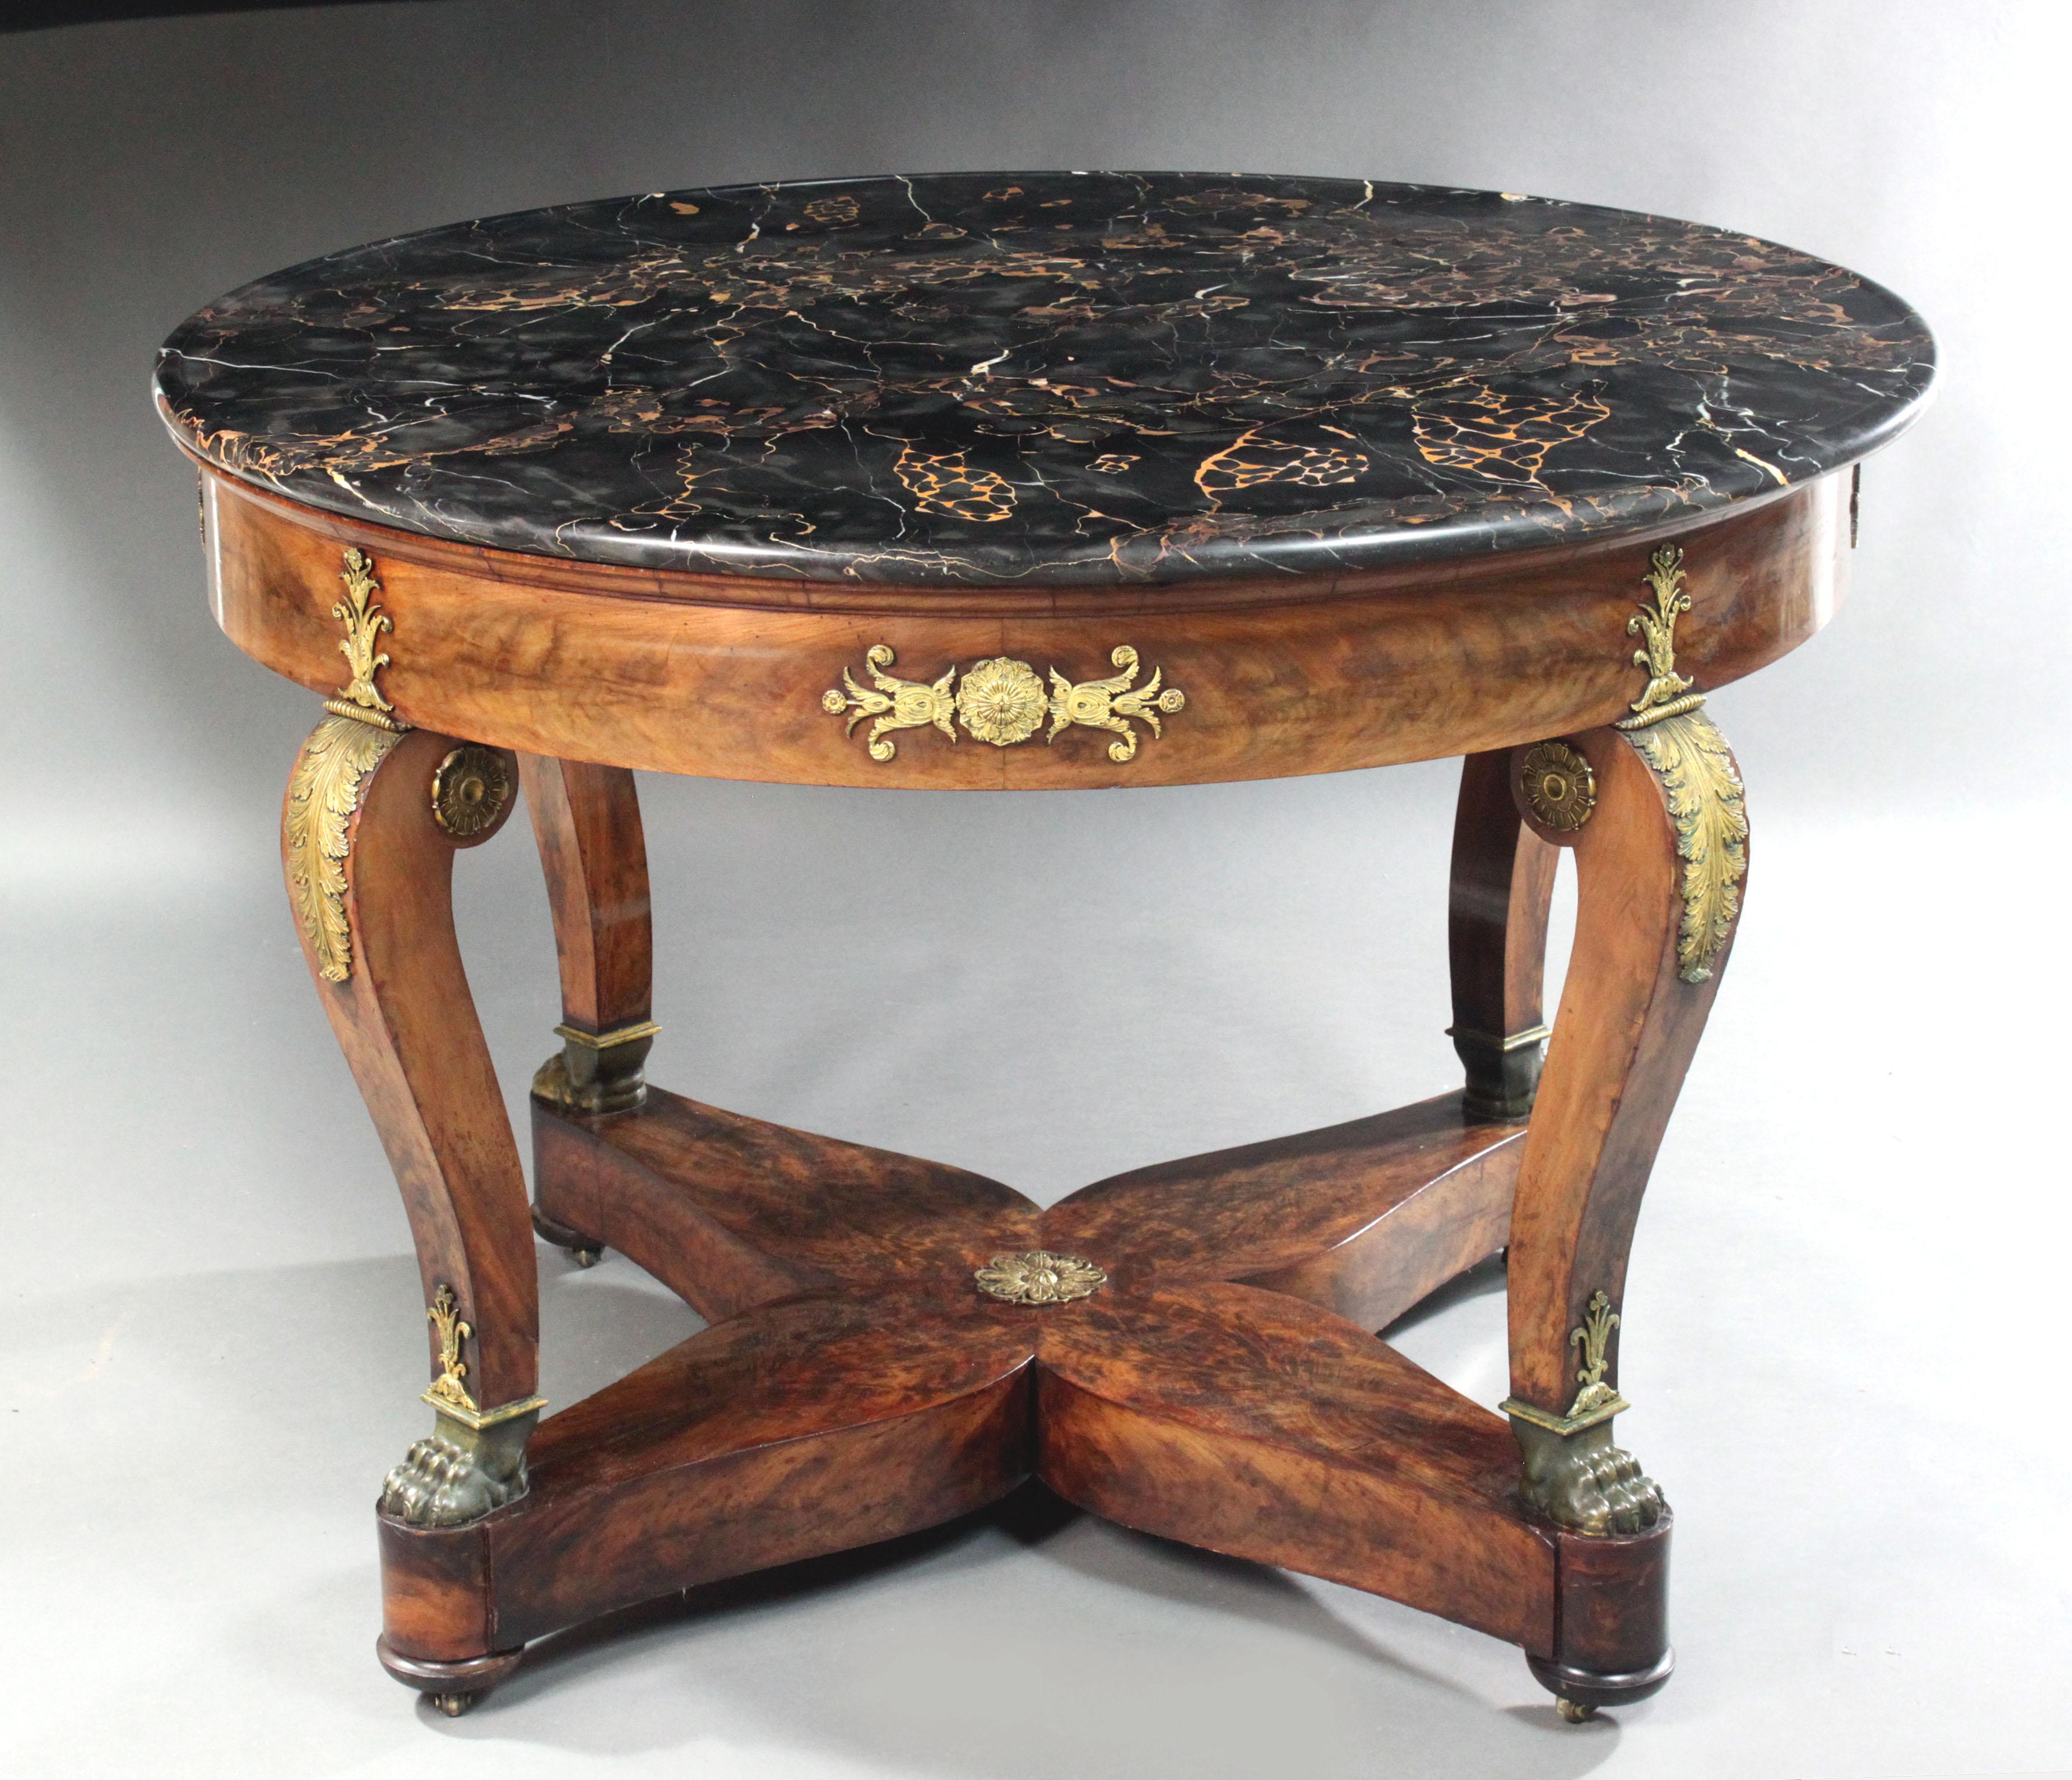 Empire Centre Table
A large French Empire centre table in figured mahogany with ormolu mounts, bronze feet and the original dished yellow-veined dark grey marble top.

This table is both larger and of better quality than most other Empire centre